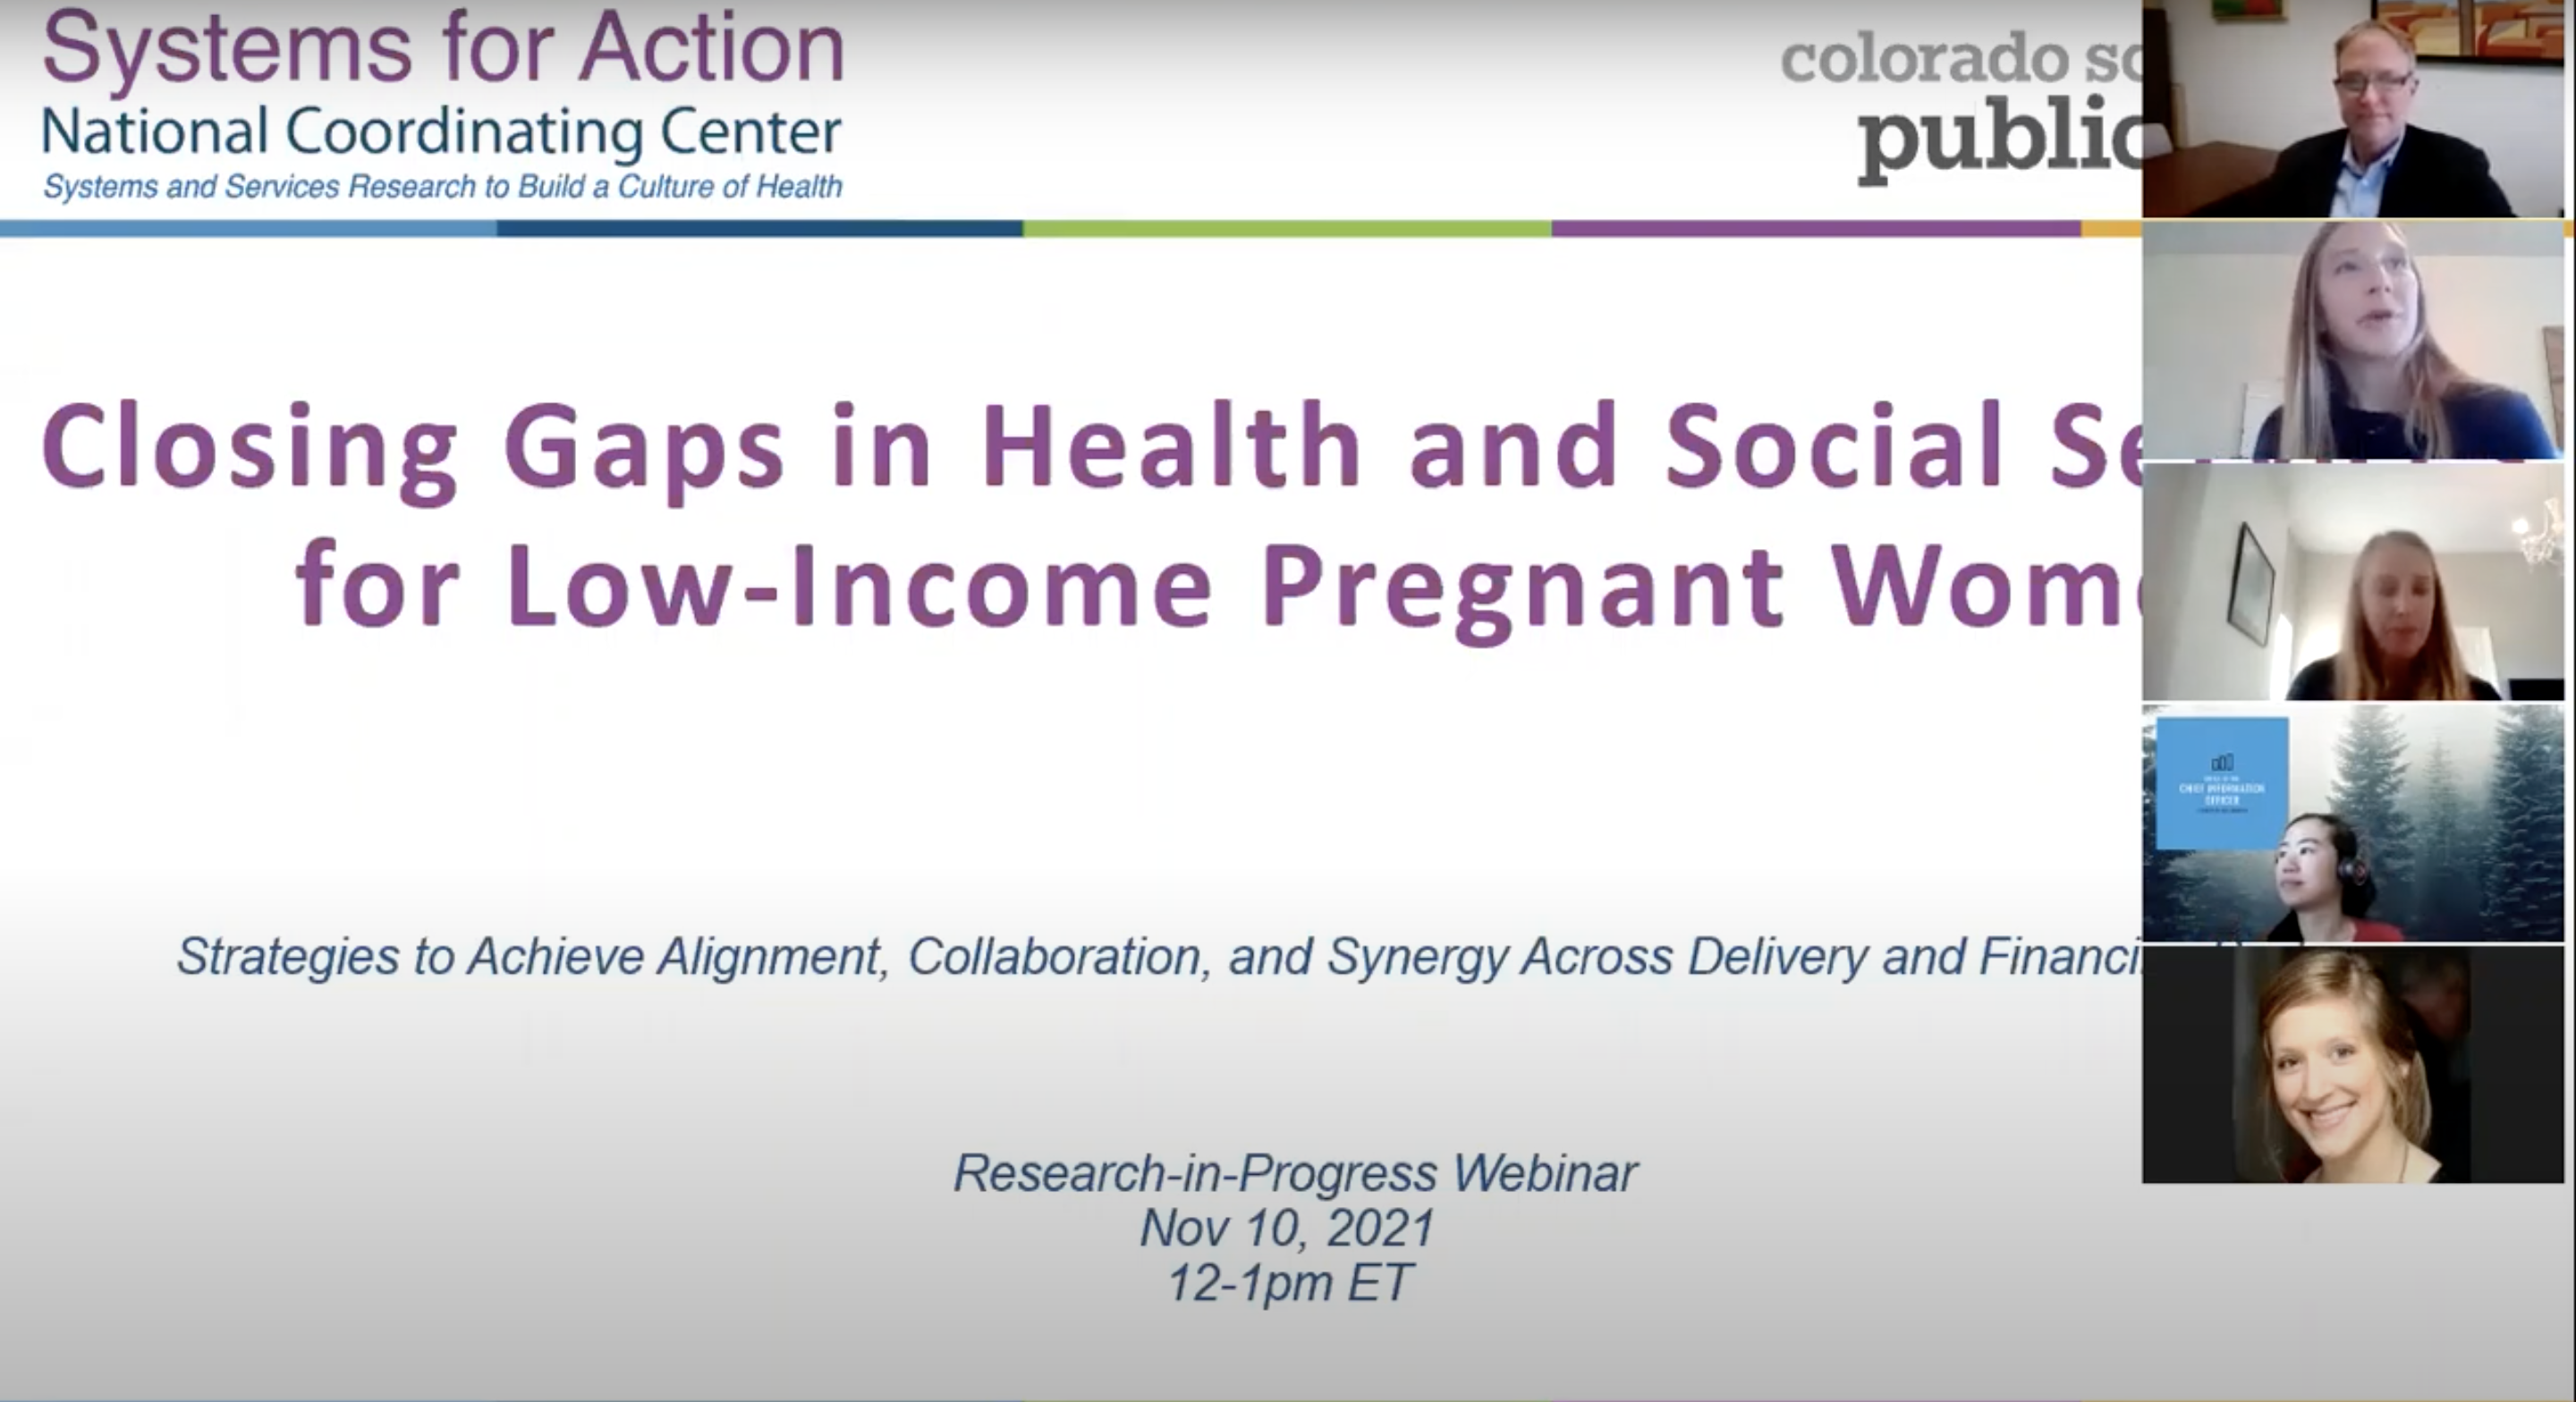 Closing the Gaps in Health and Social Services for Low-Income Pregnant Women